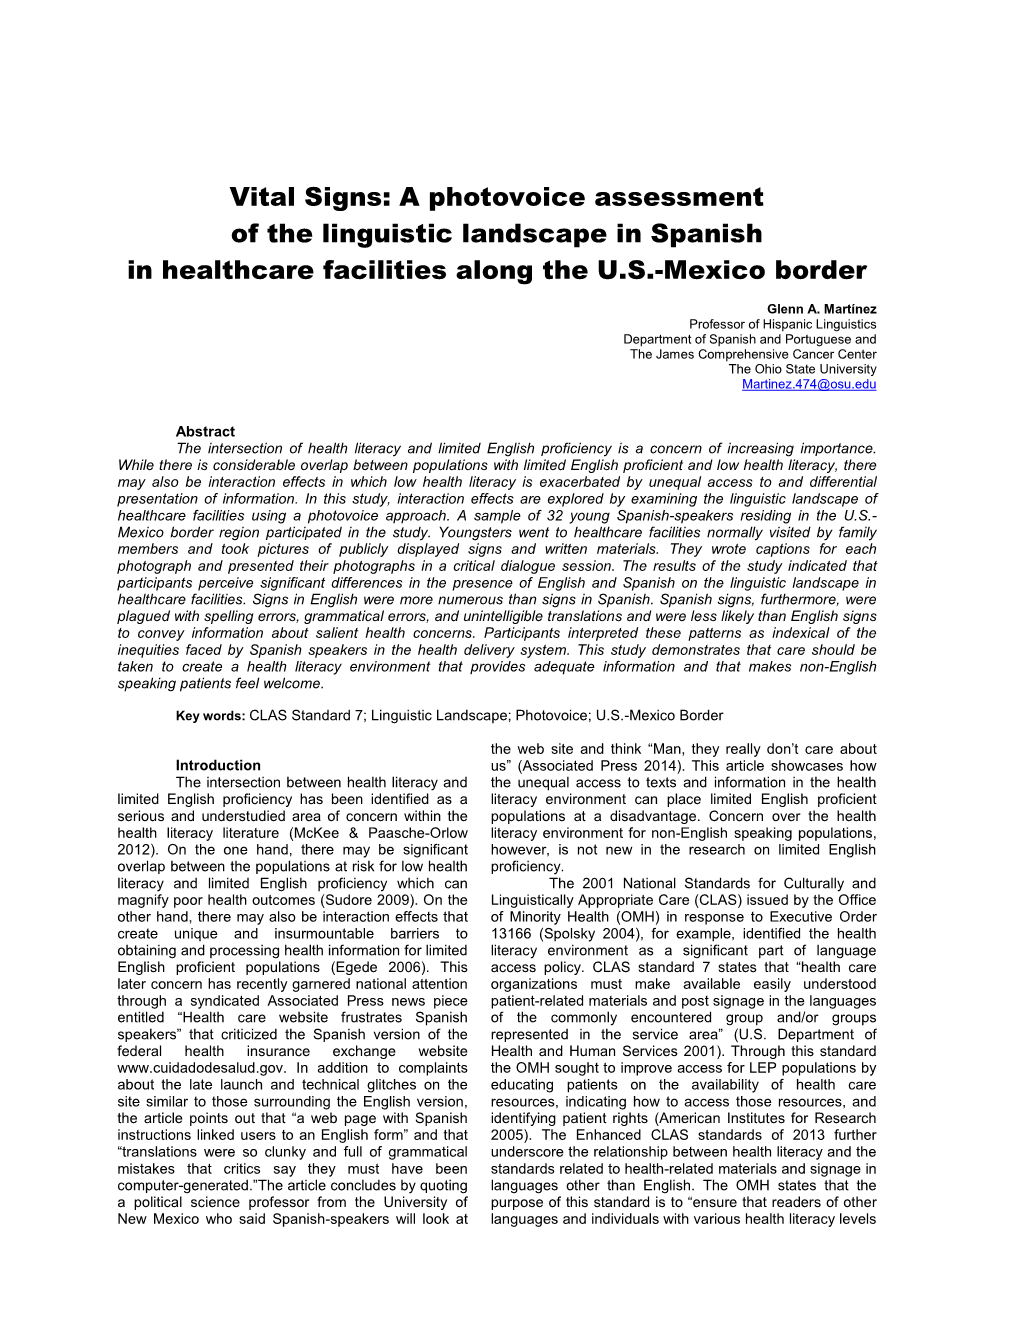 Vital Signs: a Photovoice Assessment of the Linguistic Landscape in Spanish in Healthcare Facilities Along the U.S.-Mexico Border